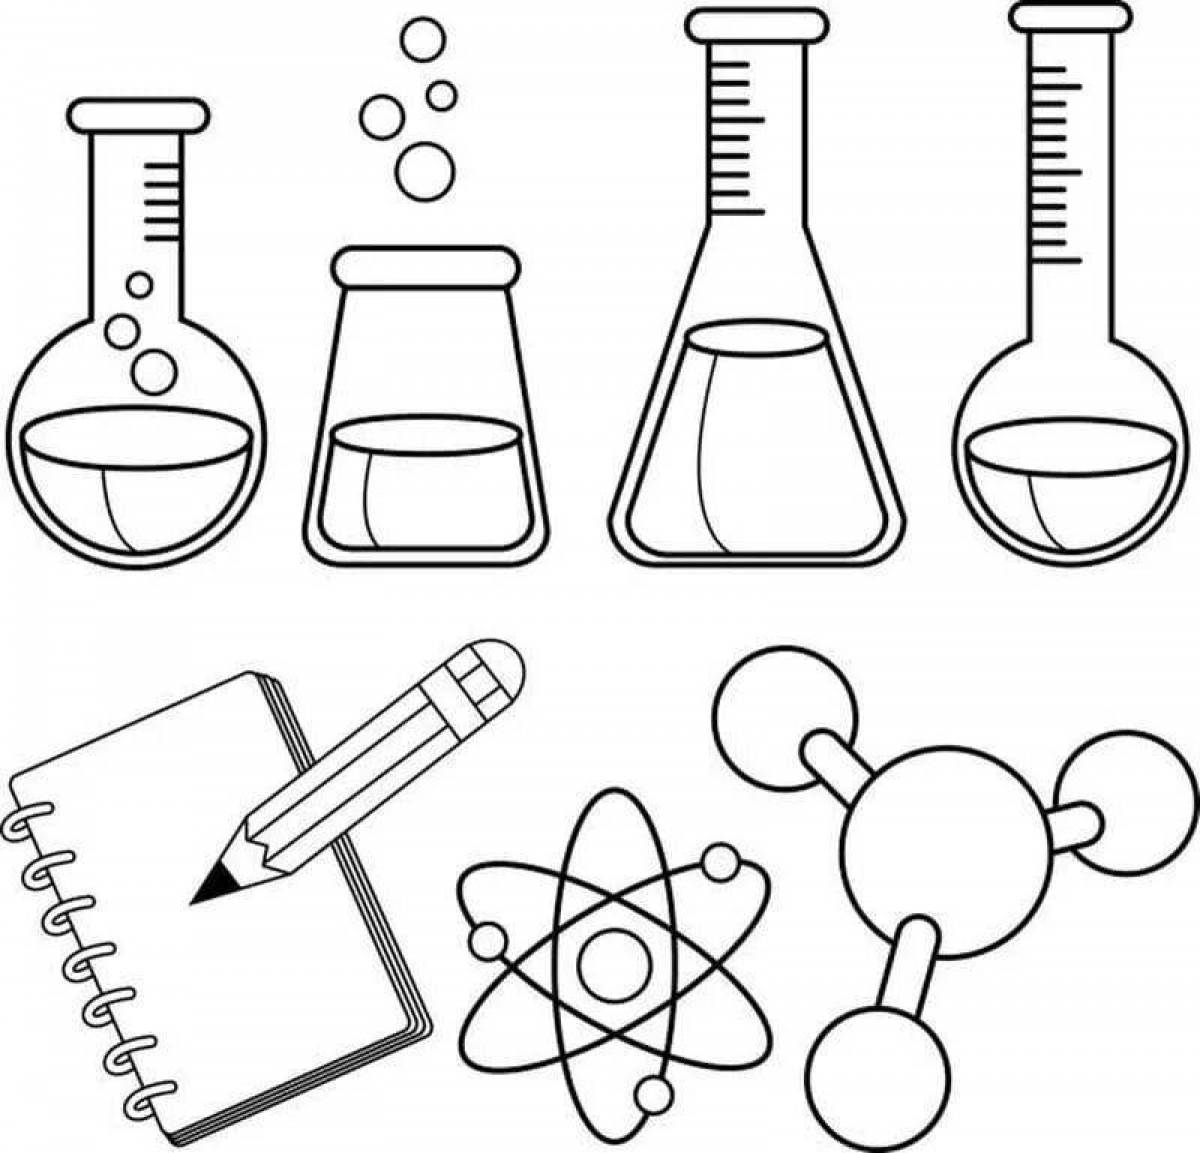 Exciting science coloring book